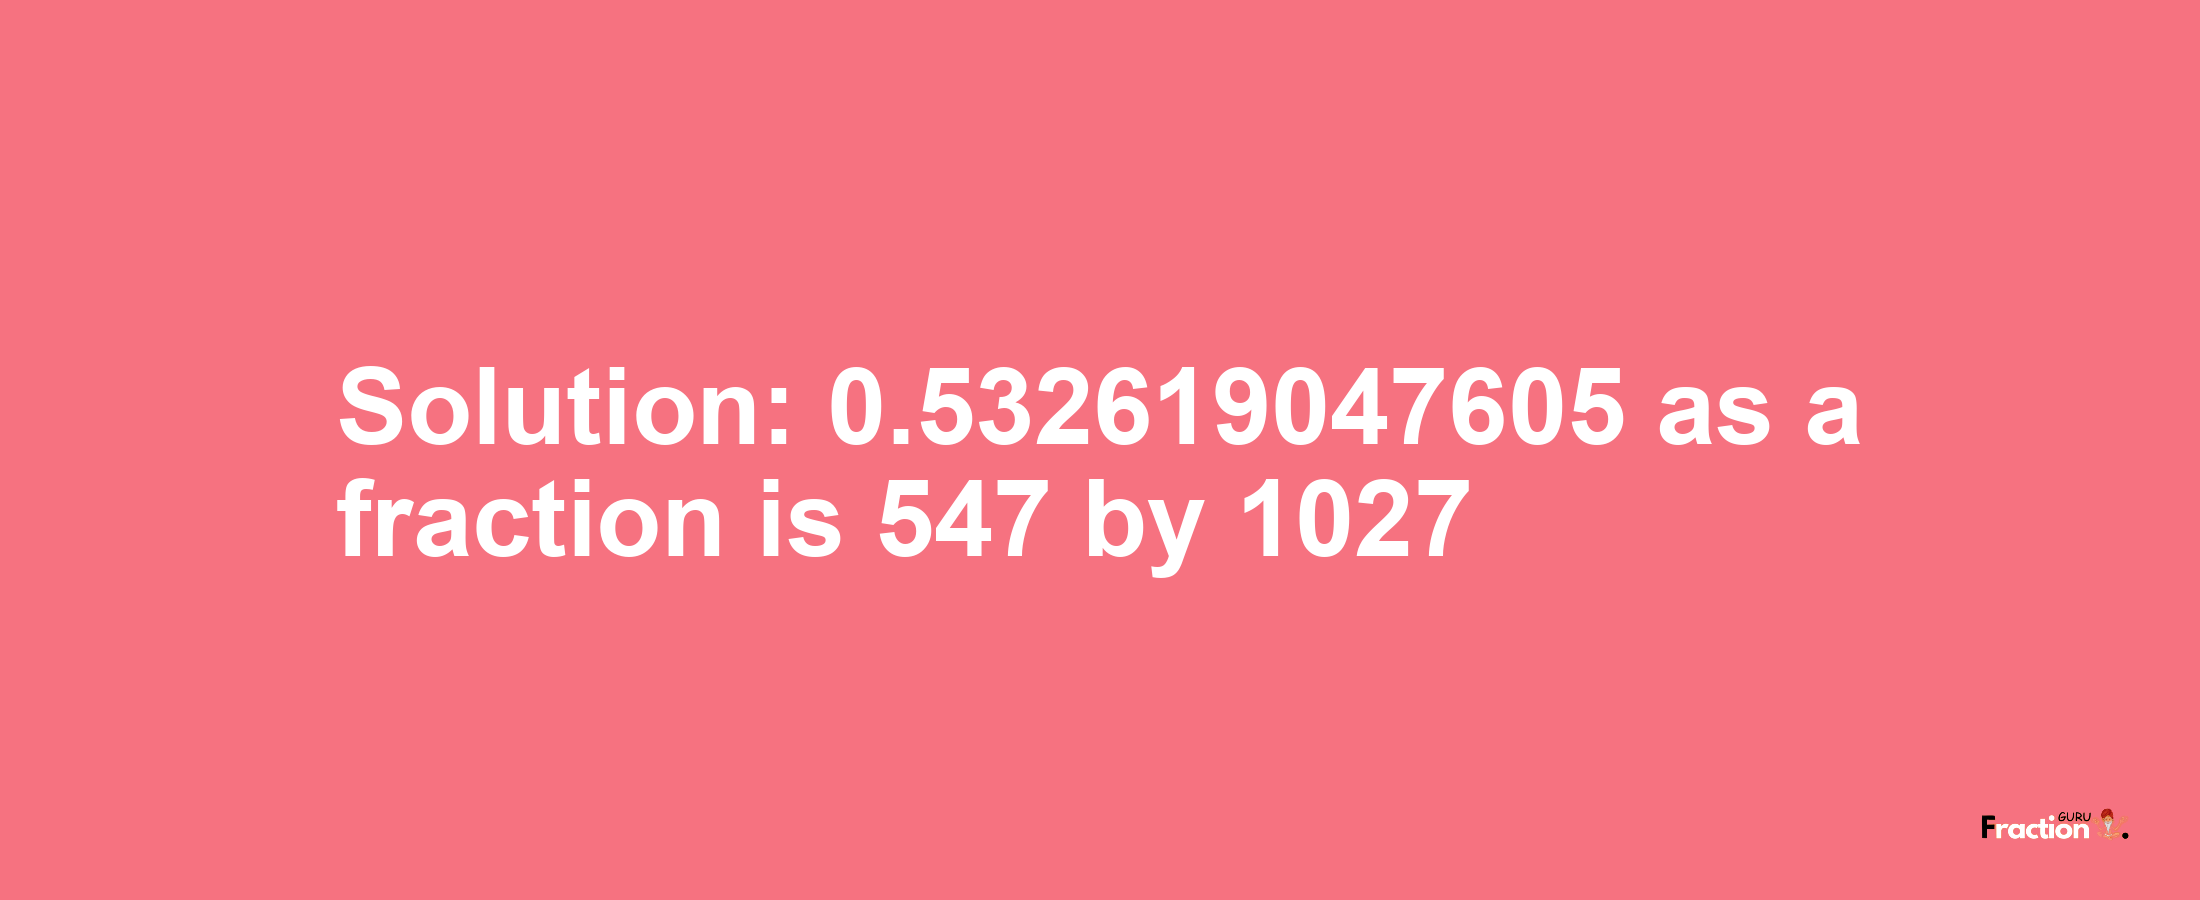 Solution:0.532619047605 as a fraction is 547/1027